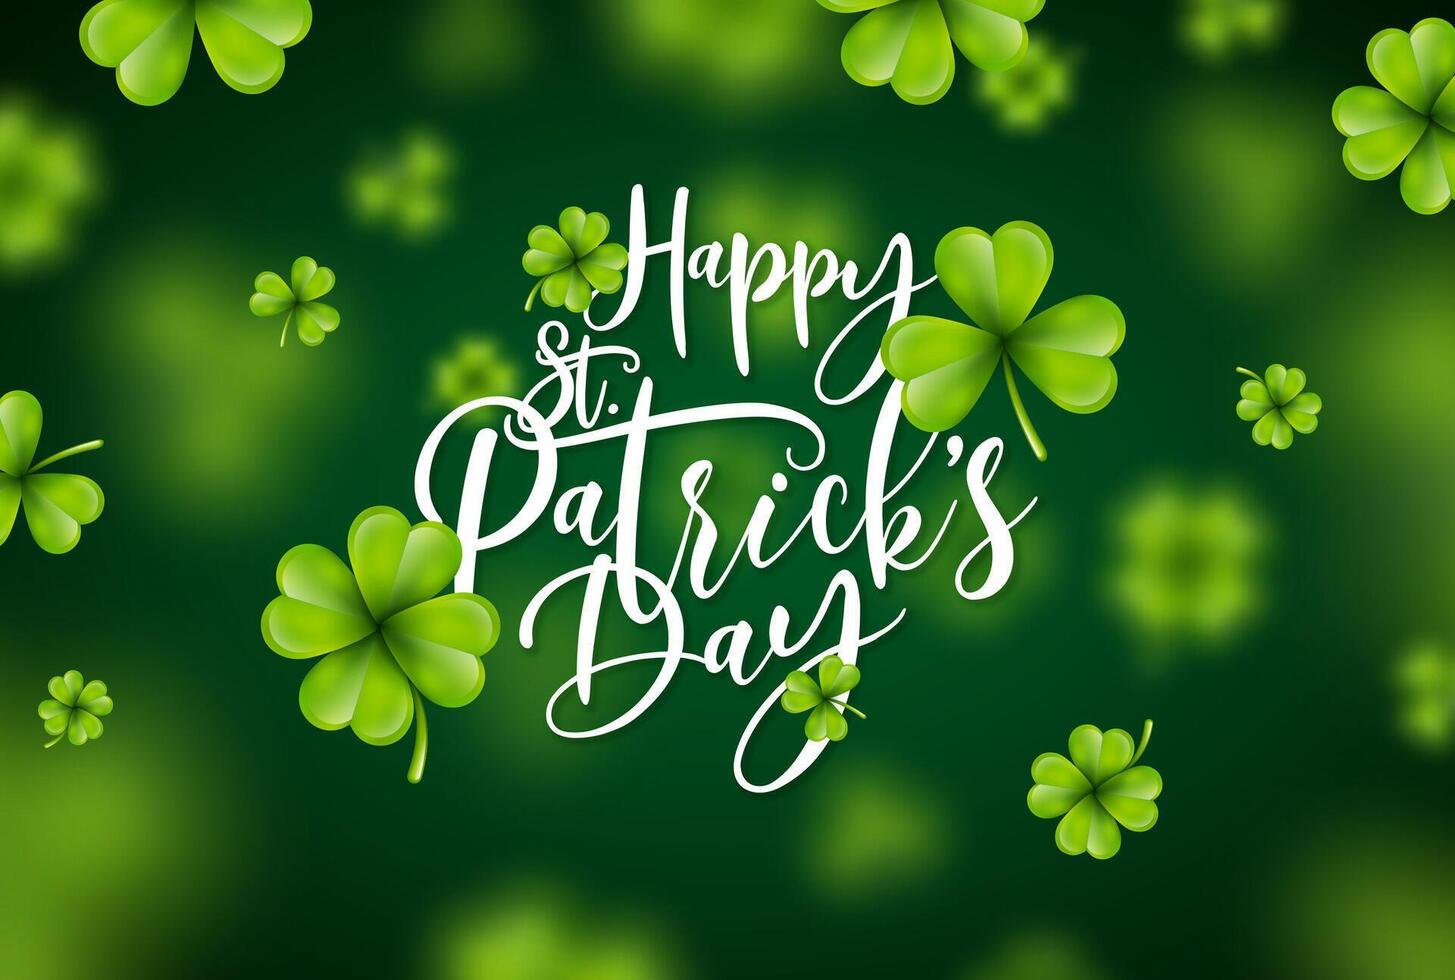 Saint Patrick's Day Illustration with Falling Clovers and Typography Letter on Green Background. Irish St. Patricks Lucky Celebration Vector Design for Flyer, Greeting Card, Web Banner, Holiday Poster